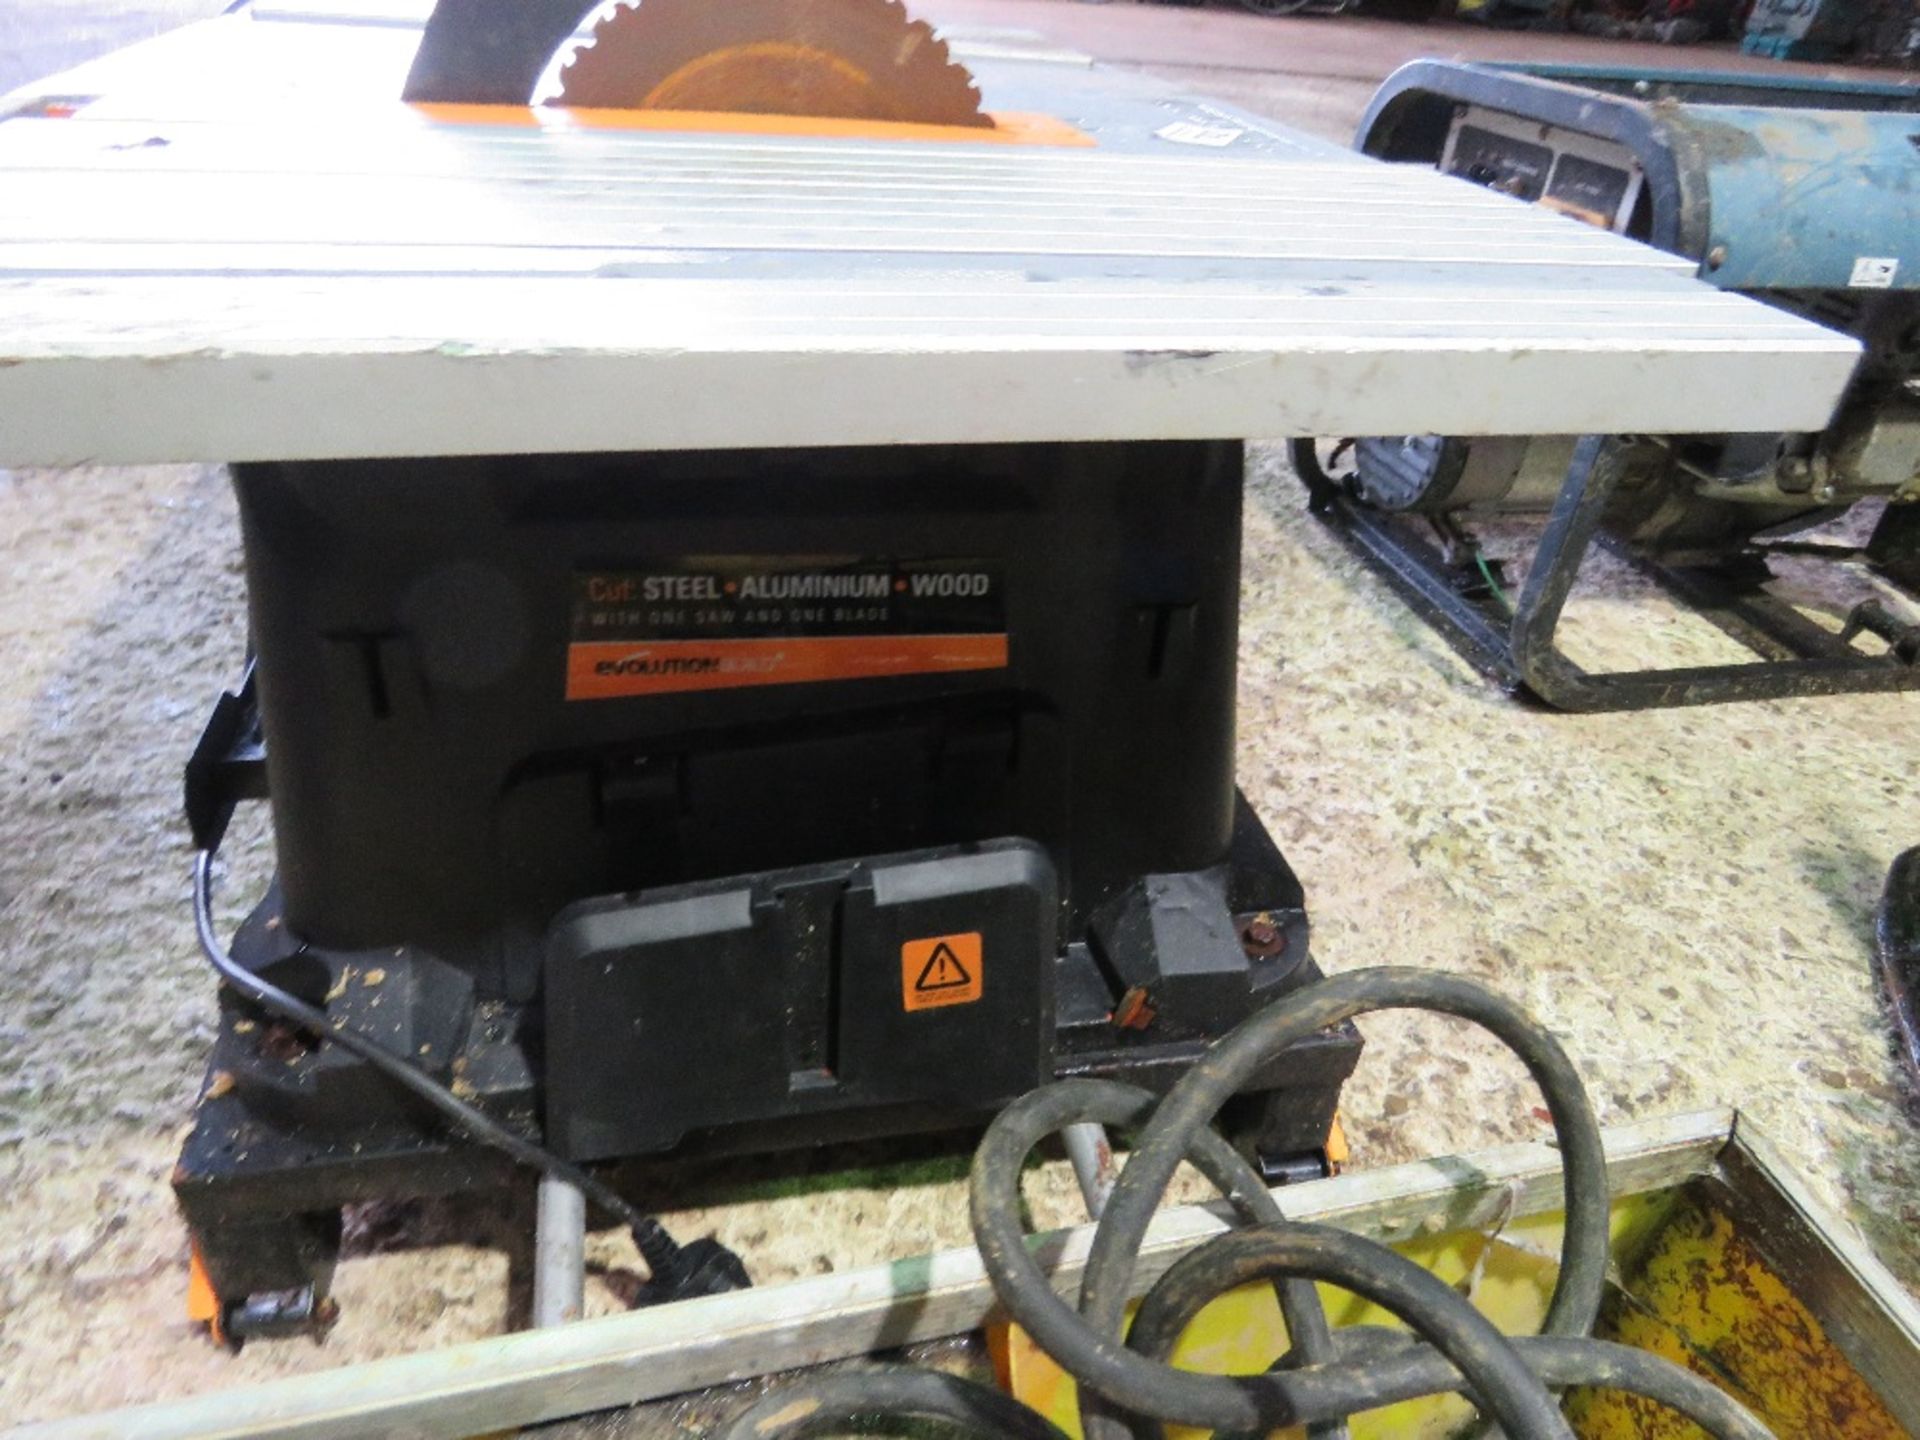 EVOLUTION 240VOLT WOOD CUTTING SAWBENCH....SOURCED FROM DEPOT CLOSURE. - Image 2 of 5